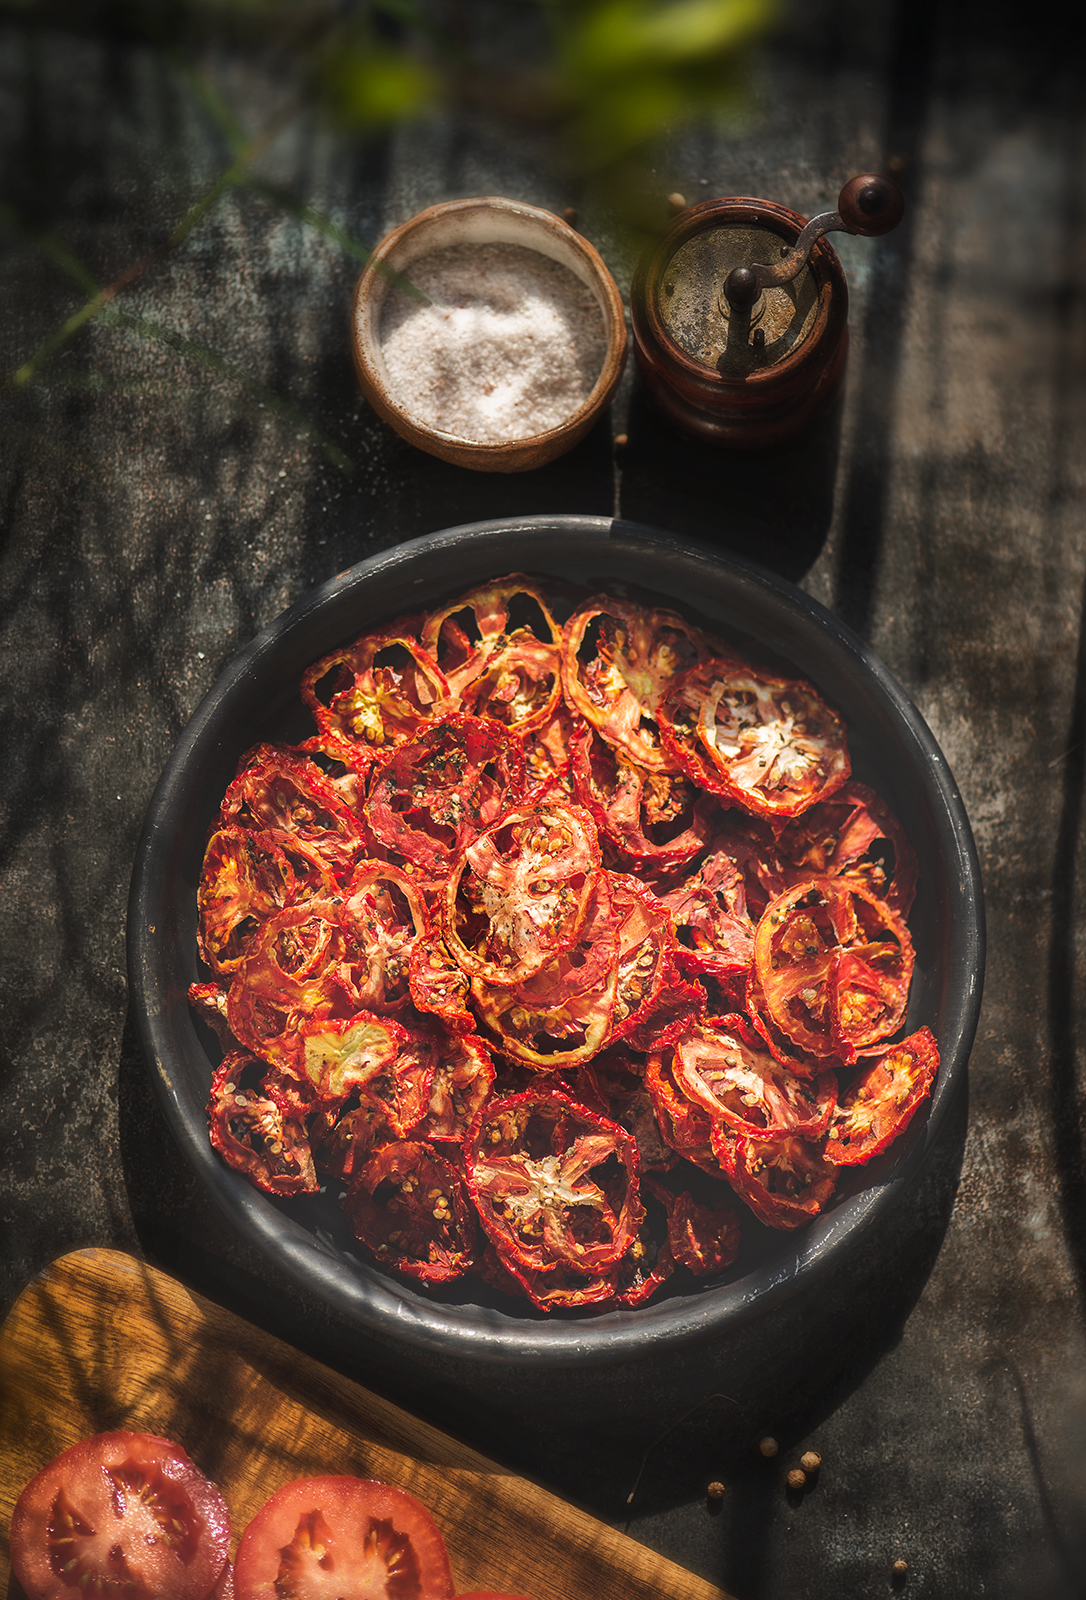 Homemade sun-dried tomatoes are so easy & convenient to make & tastes so much better than the store bought ones. Make it in summer and use it through the year.